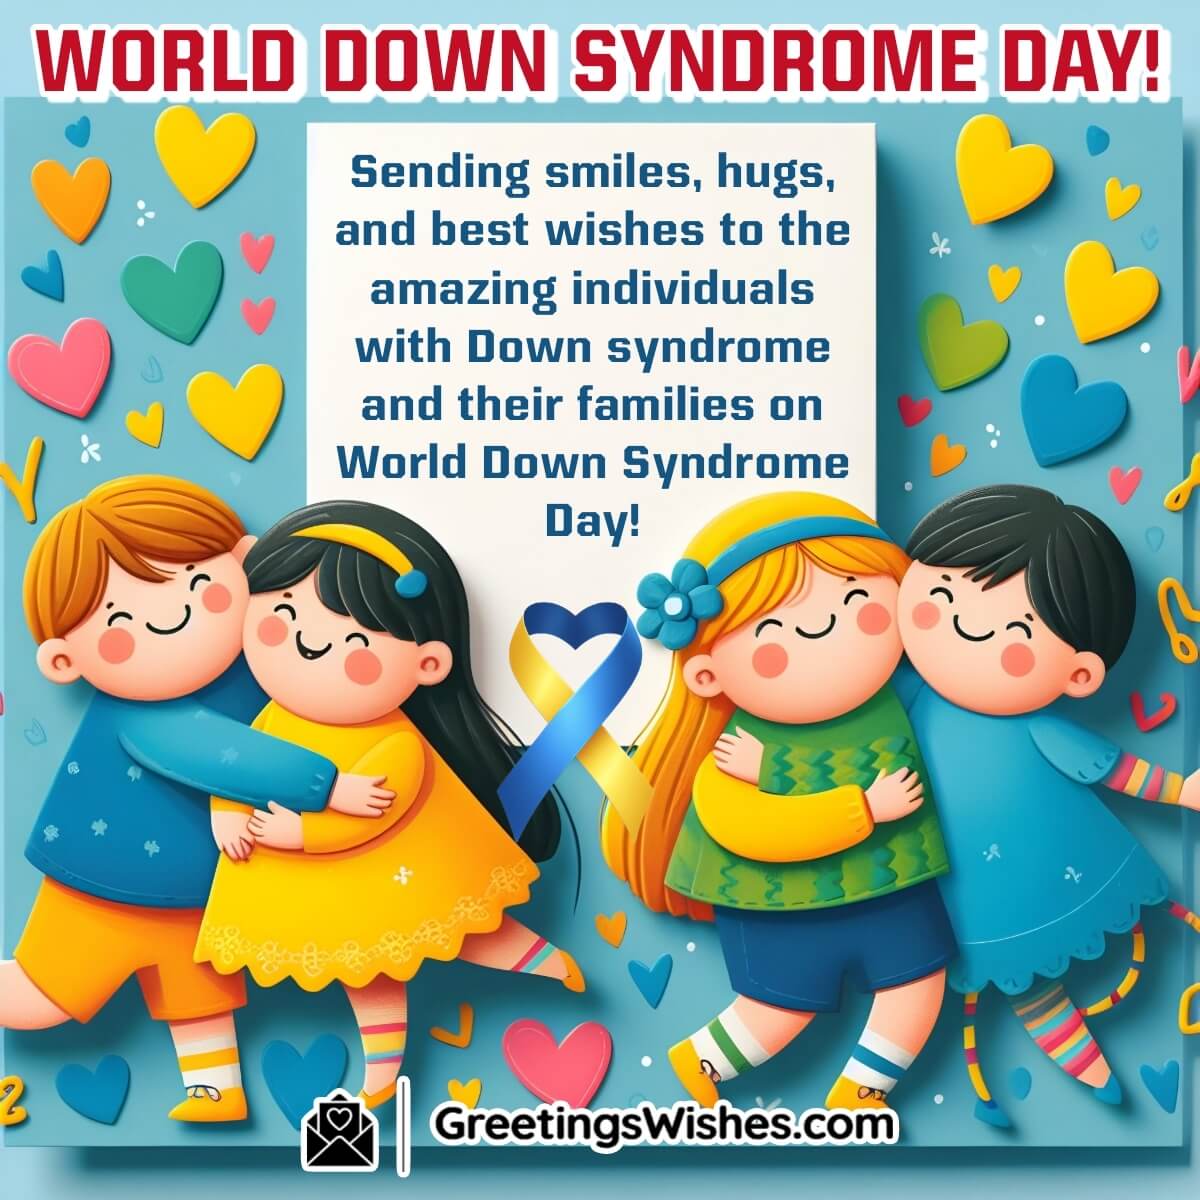 World Down Syndrome Day Wish Greetings